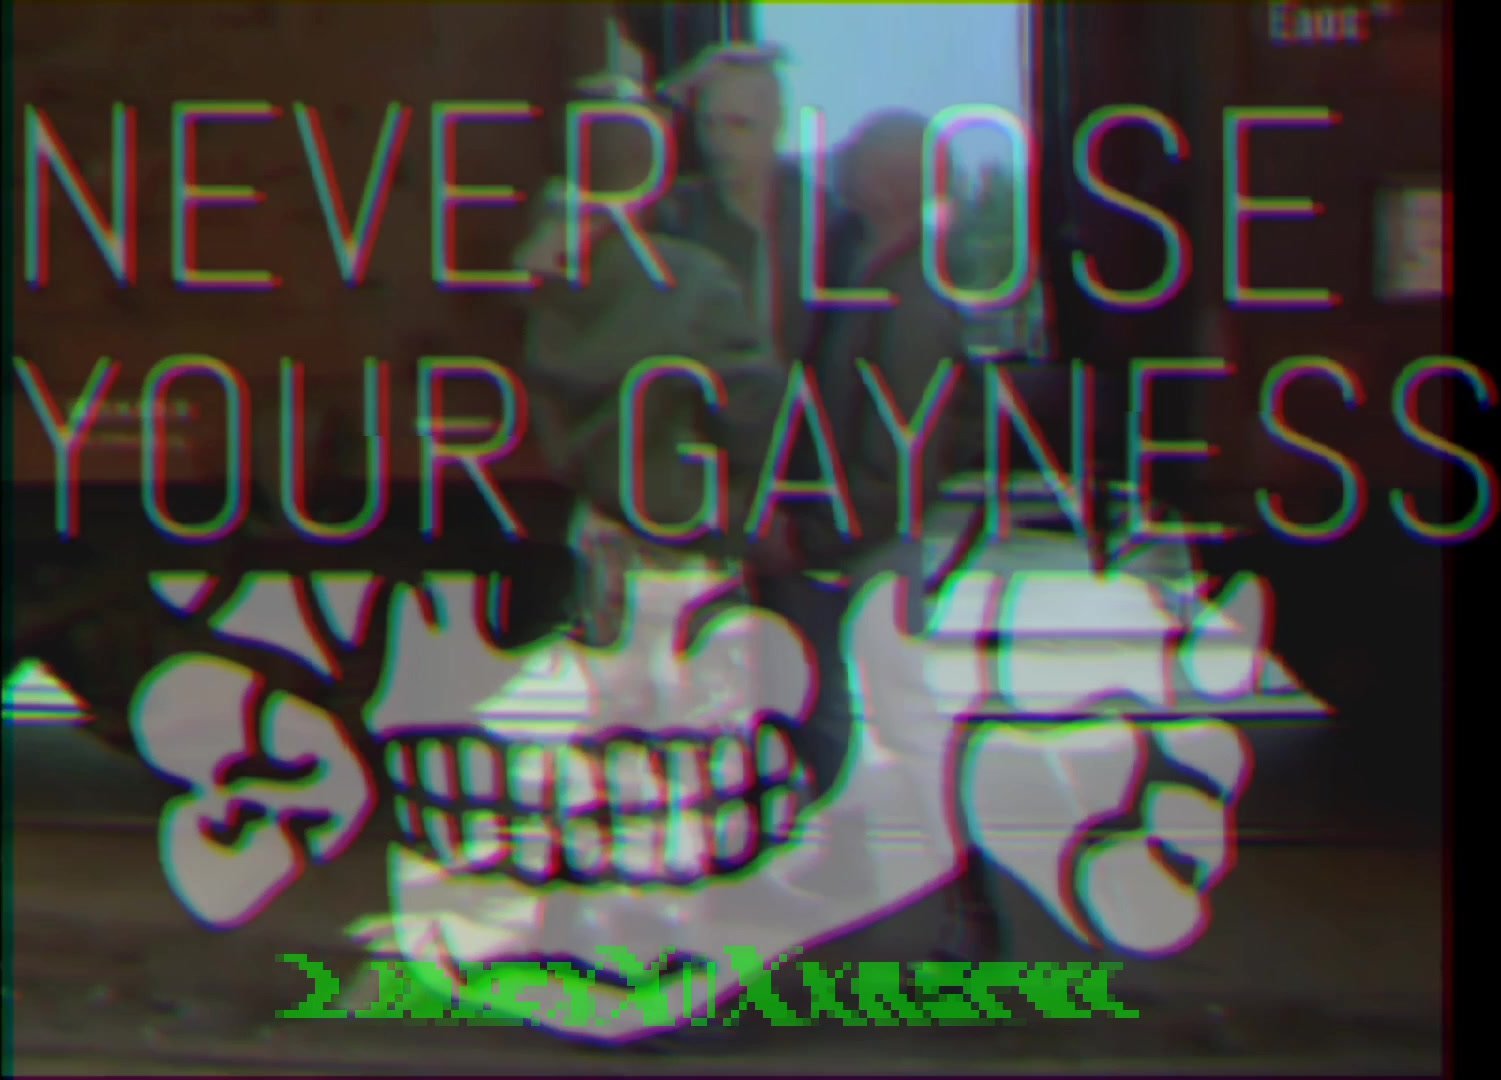 ⌖ NEVER LOSE YOUR GAYNESS OFFICIAL SKINHEAD MUSIC VID ⌖